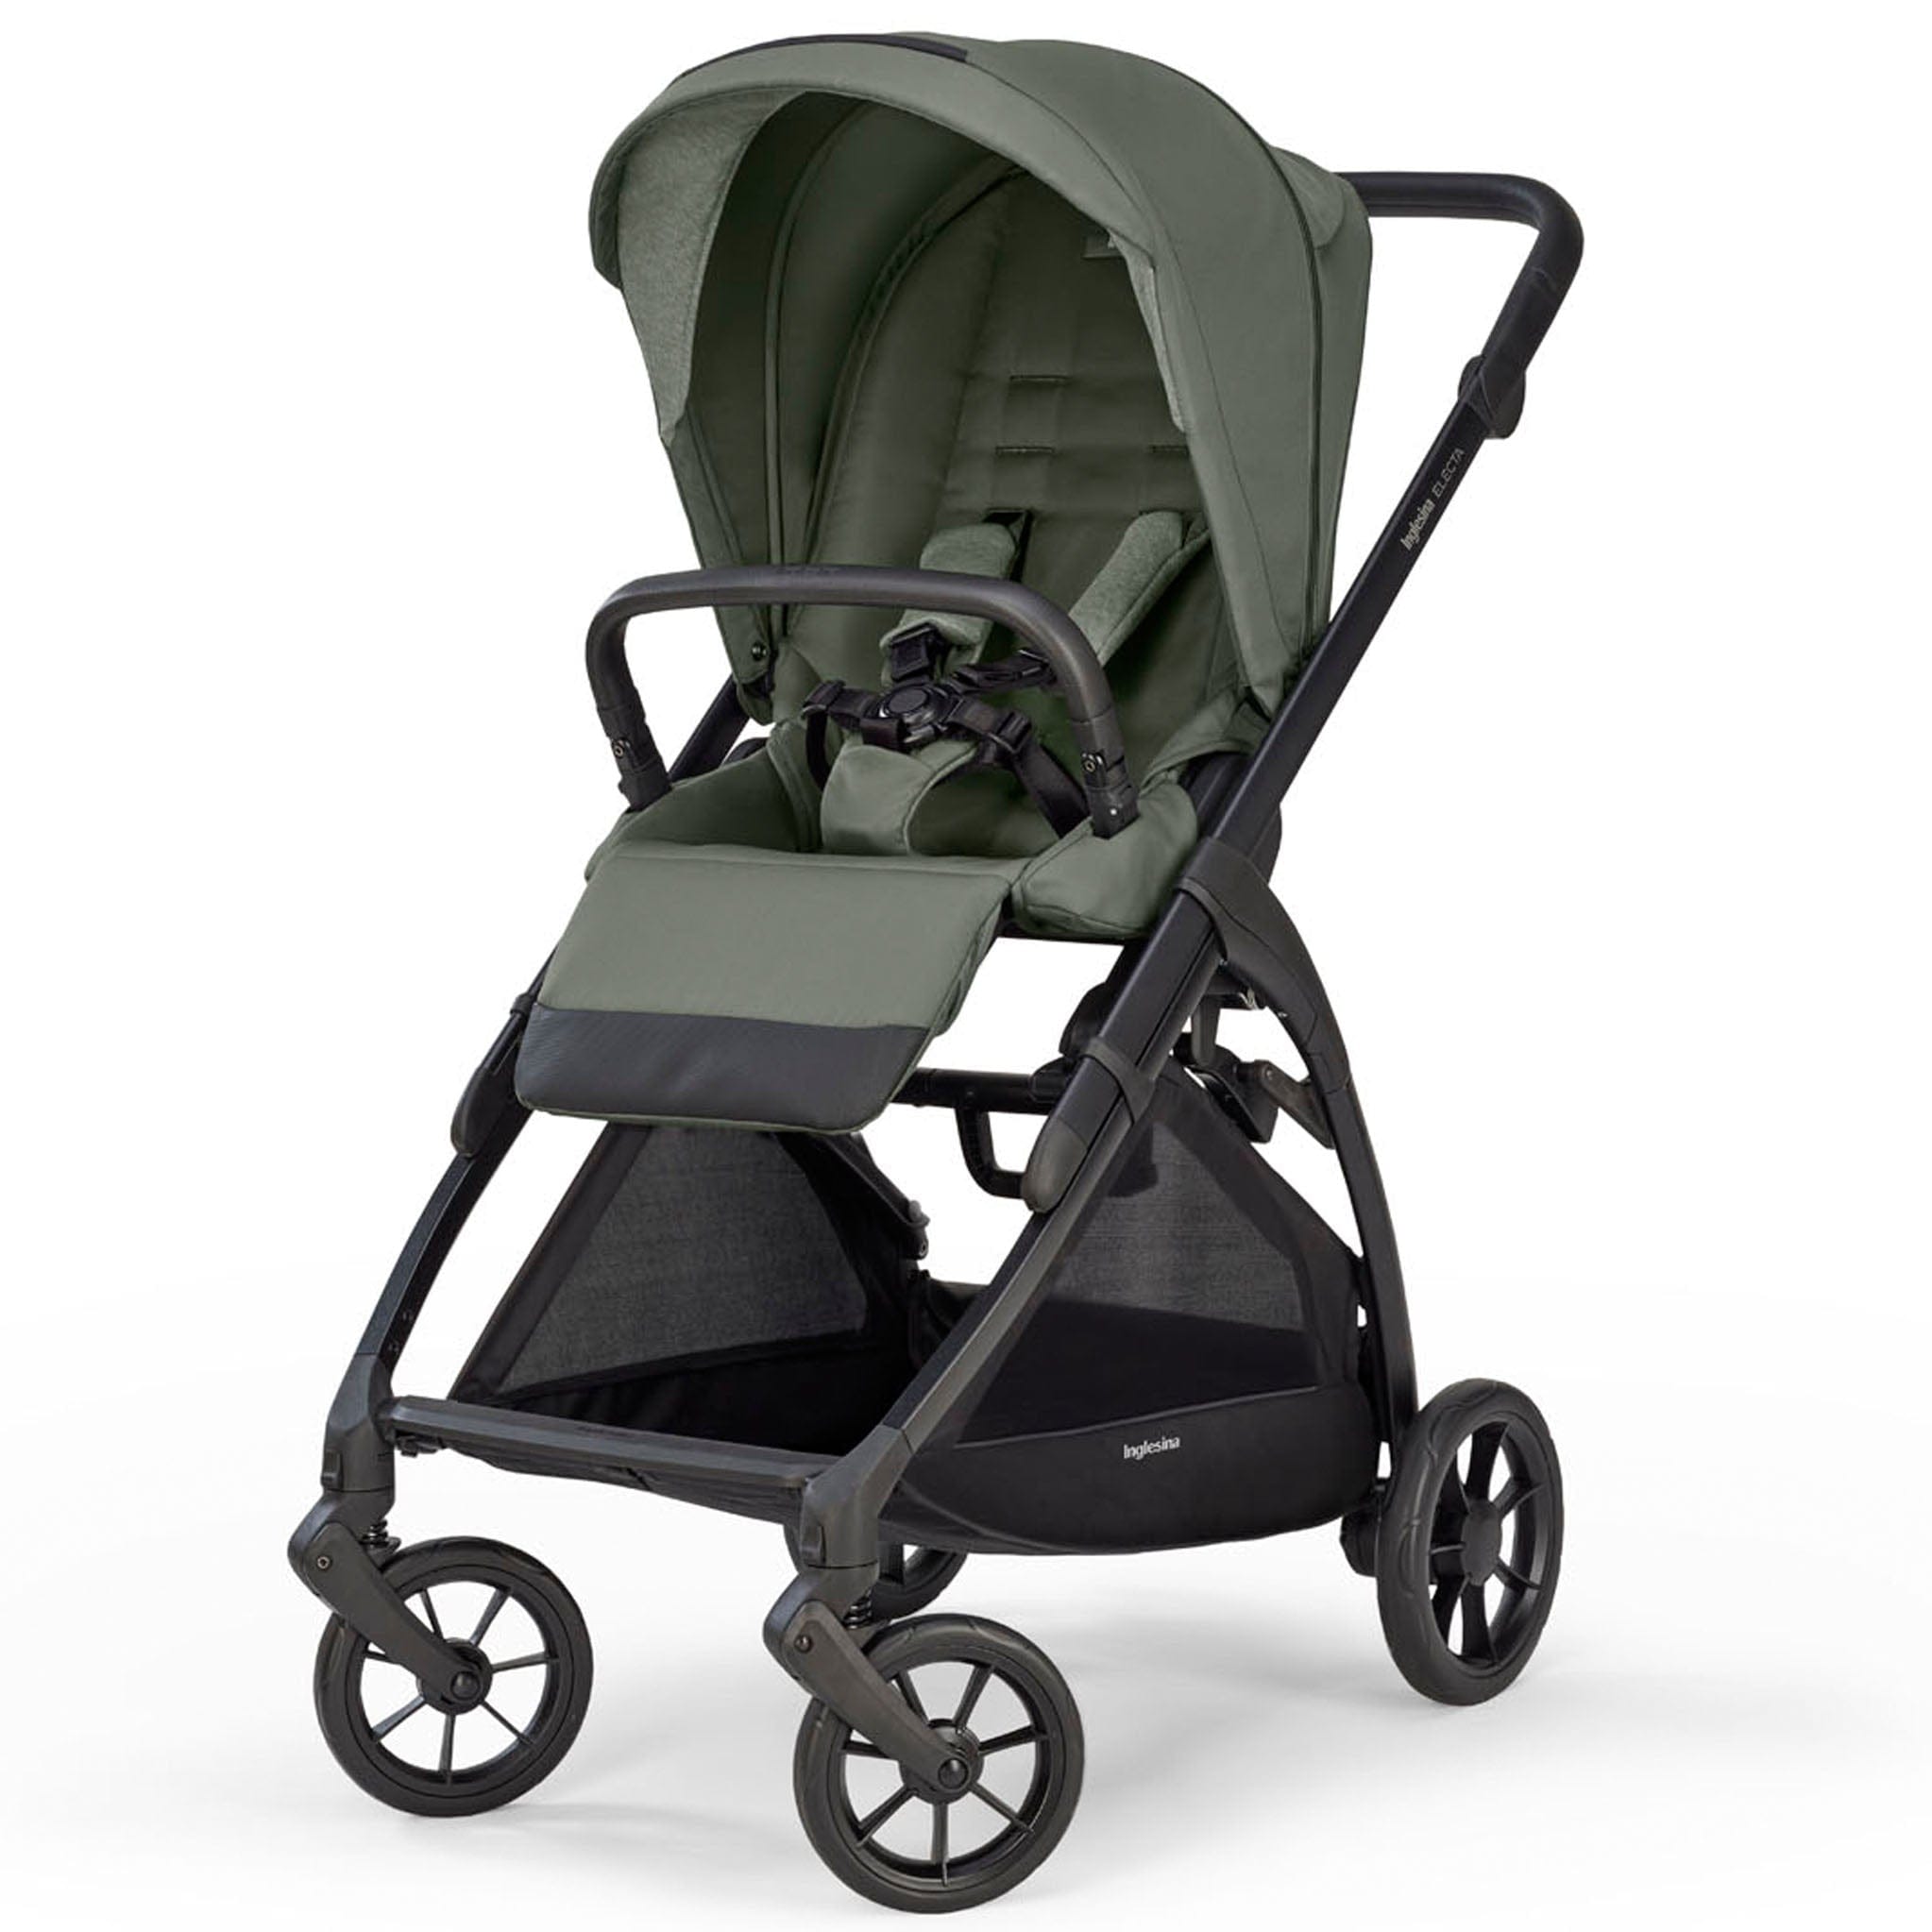 Inglesina travel systems Inglesina Electa System Quattro in Tribeca Green with Darwin car seat and i-Size base ELC-TRI-GRE